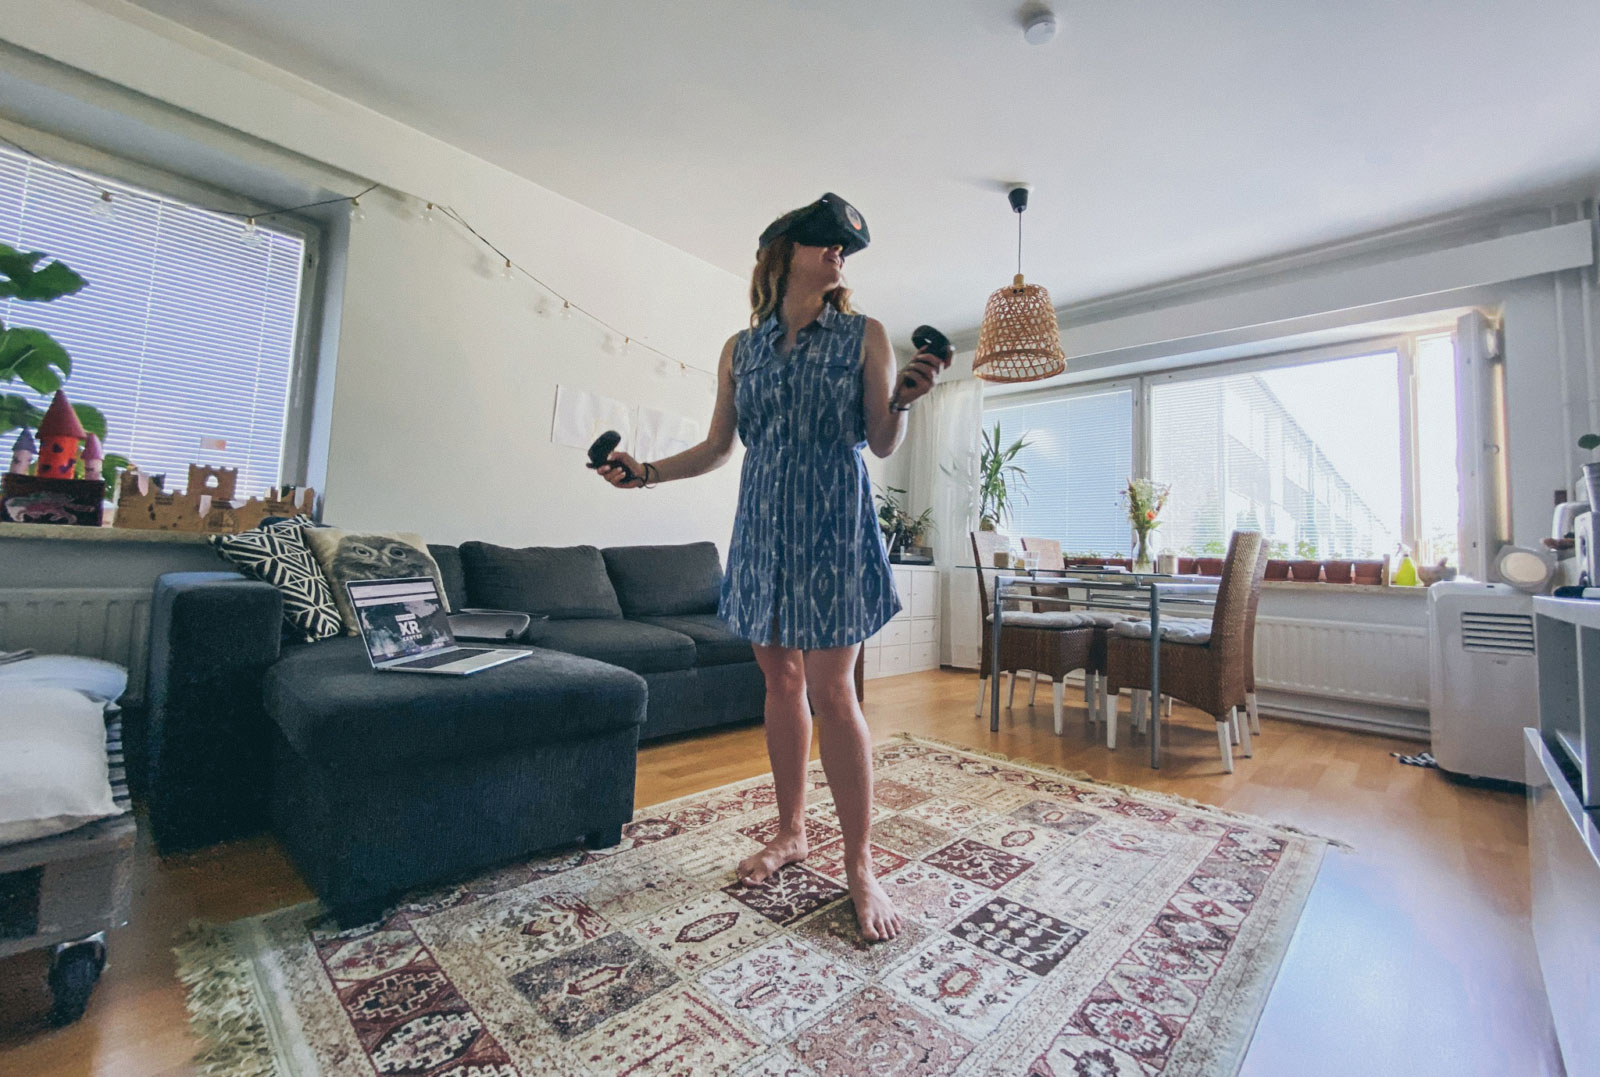 Woman at home, in the middle of a living room, using an Oculus Quest headset.